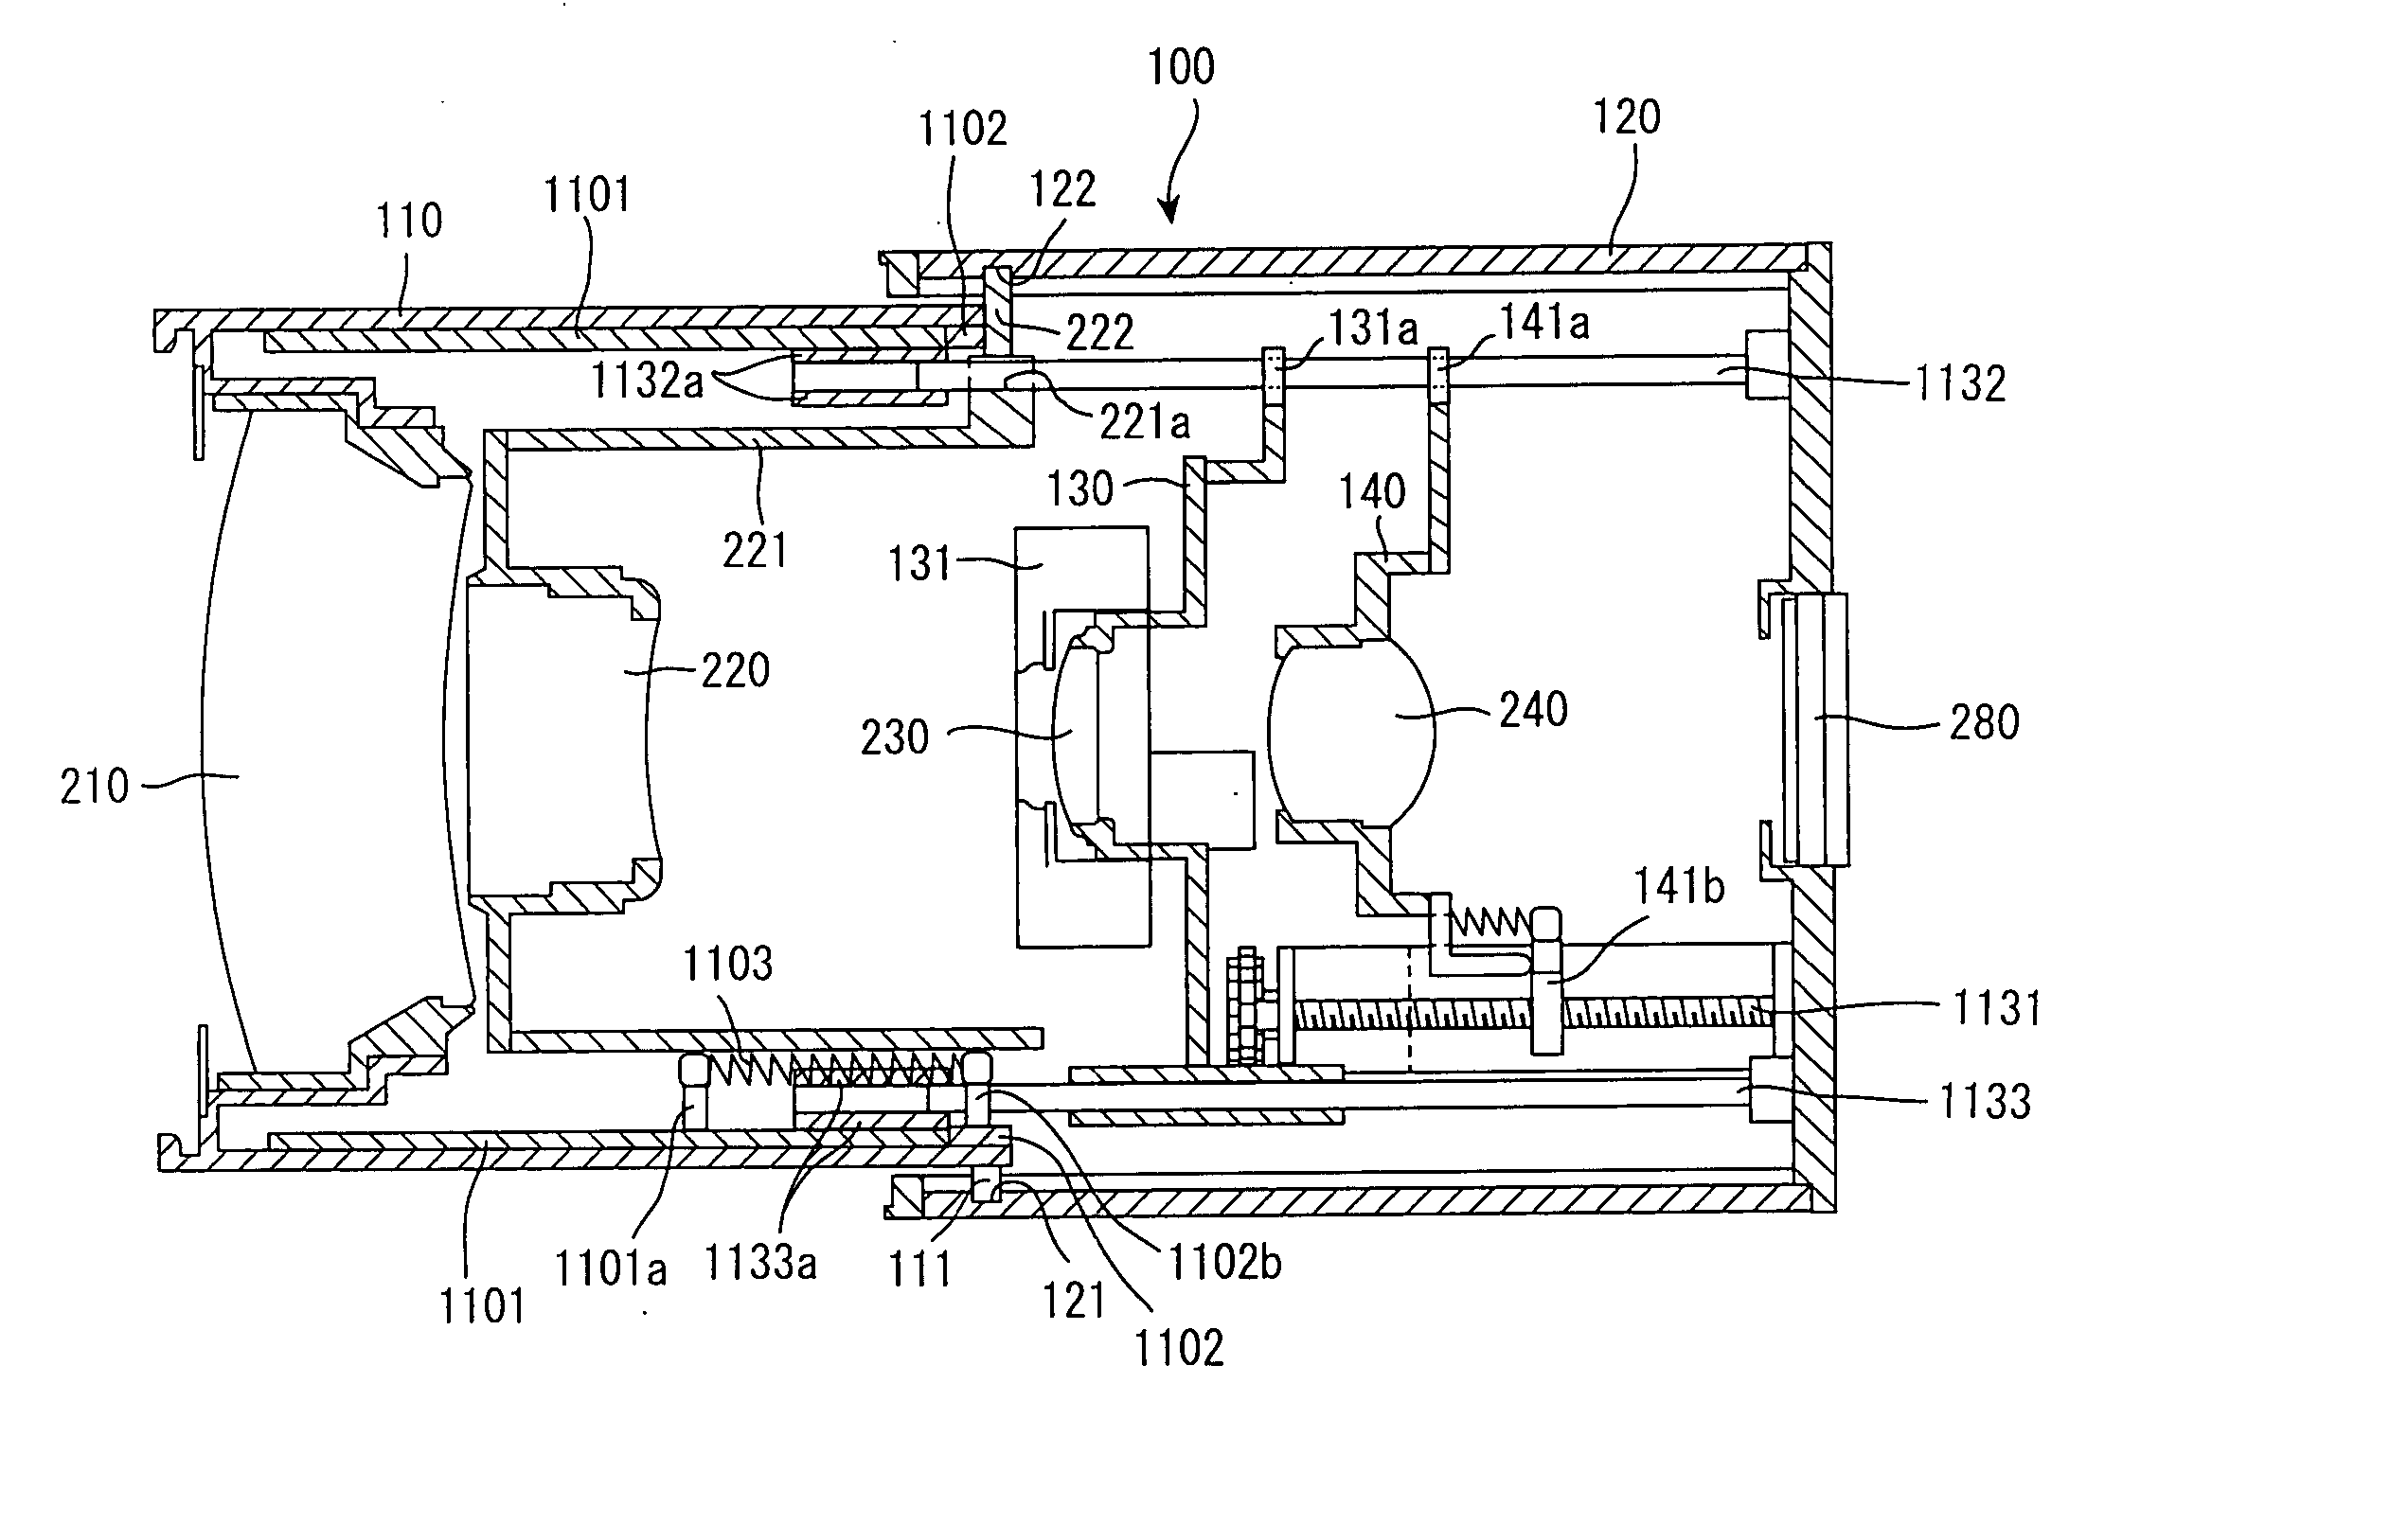 Lens barrel and image taking apparatus